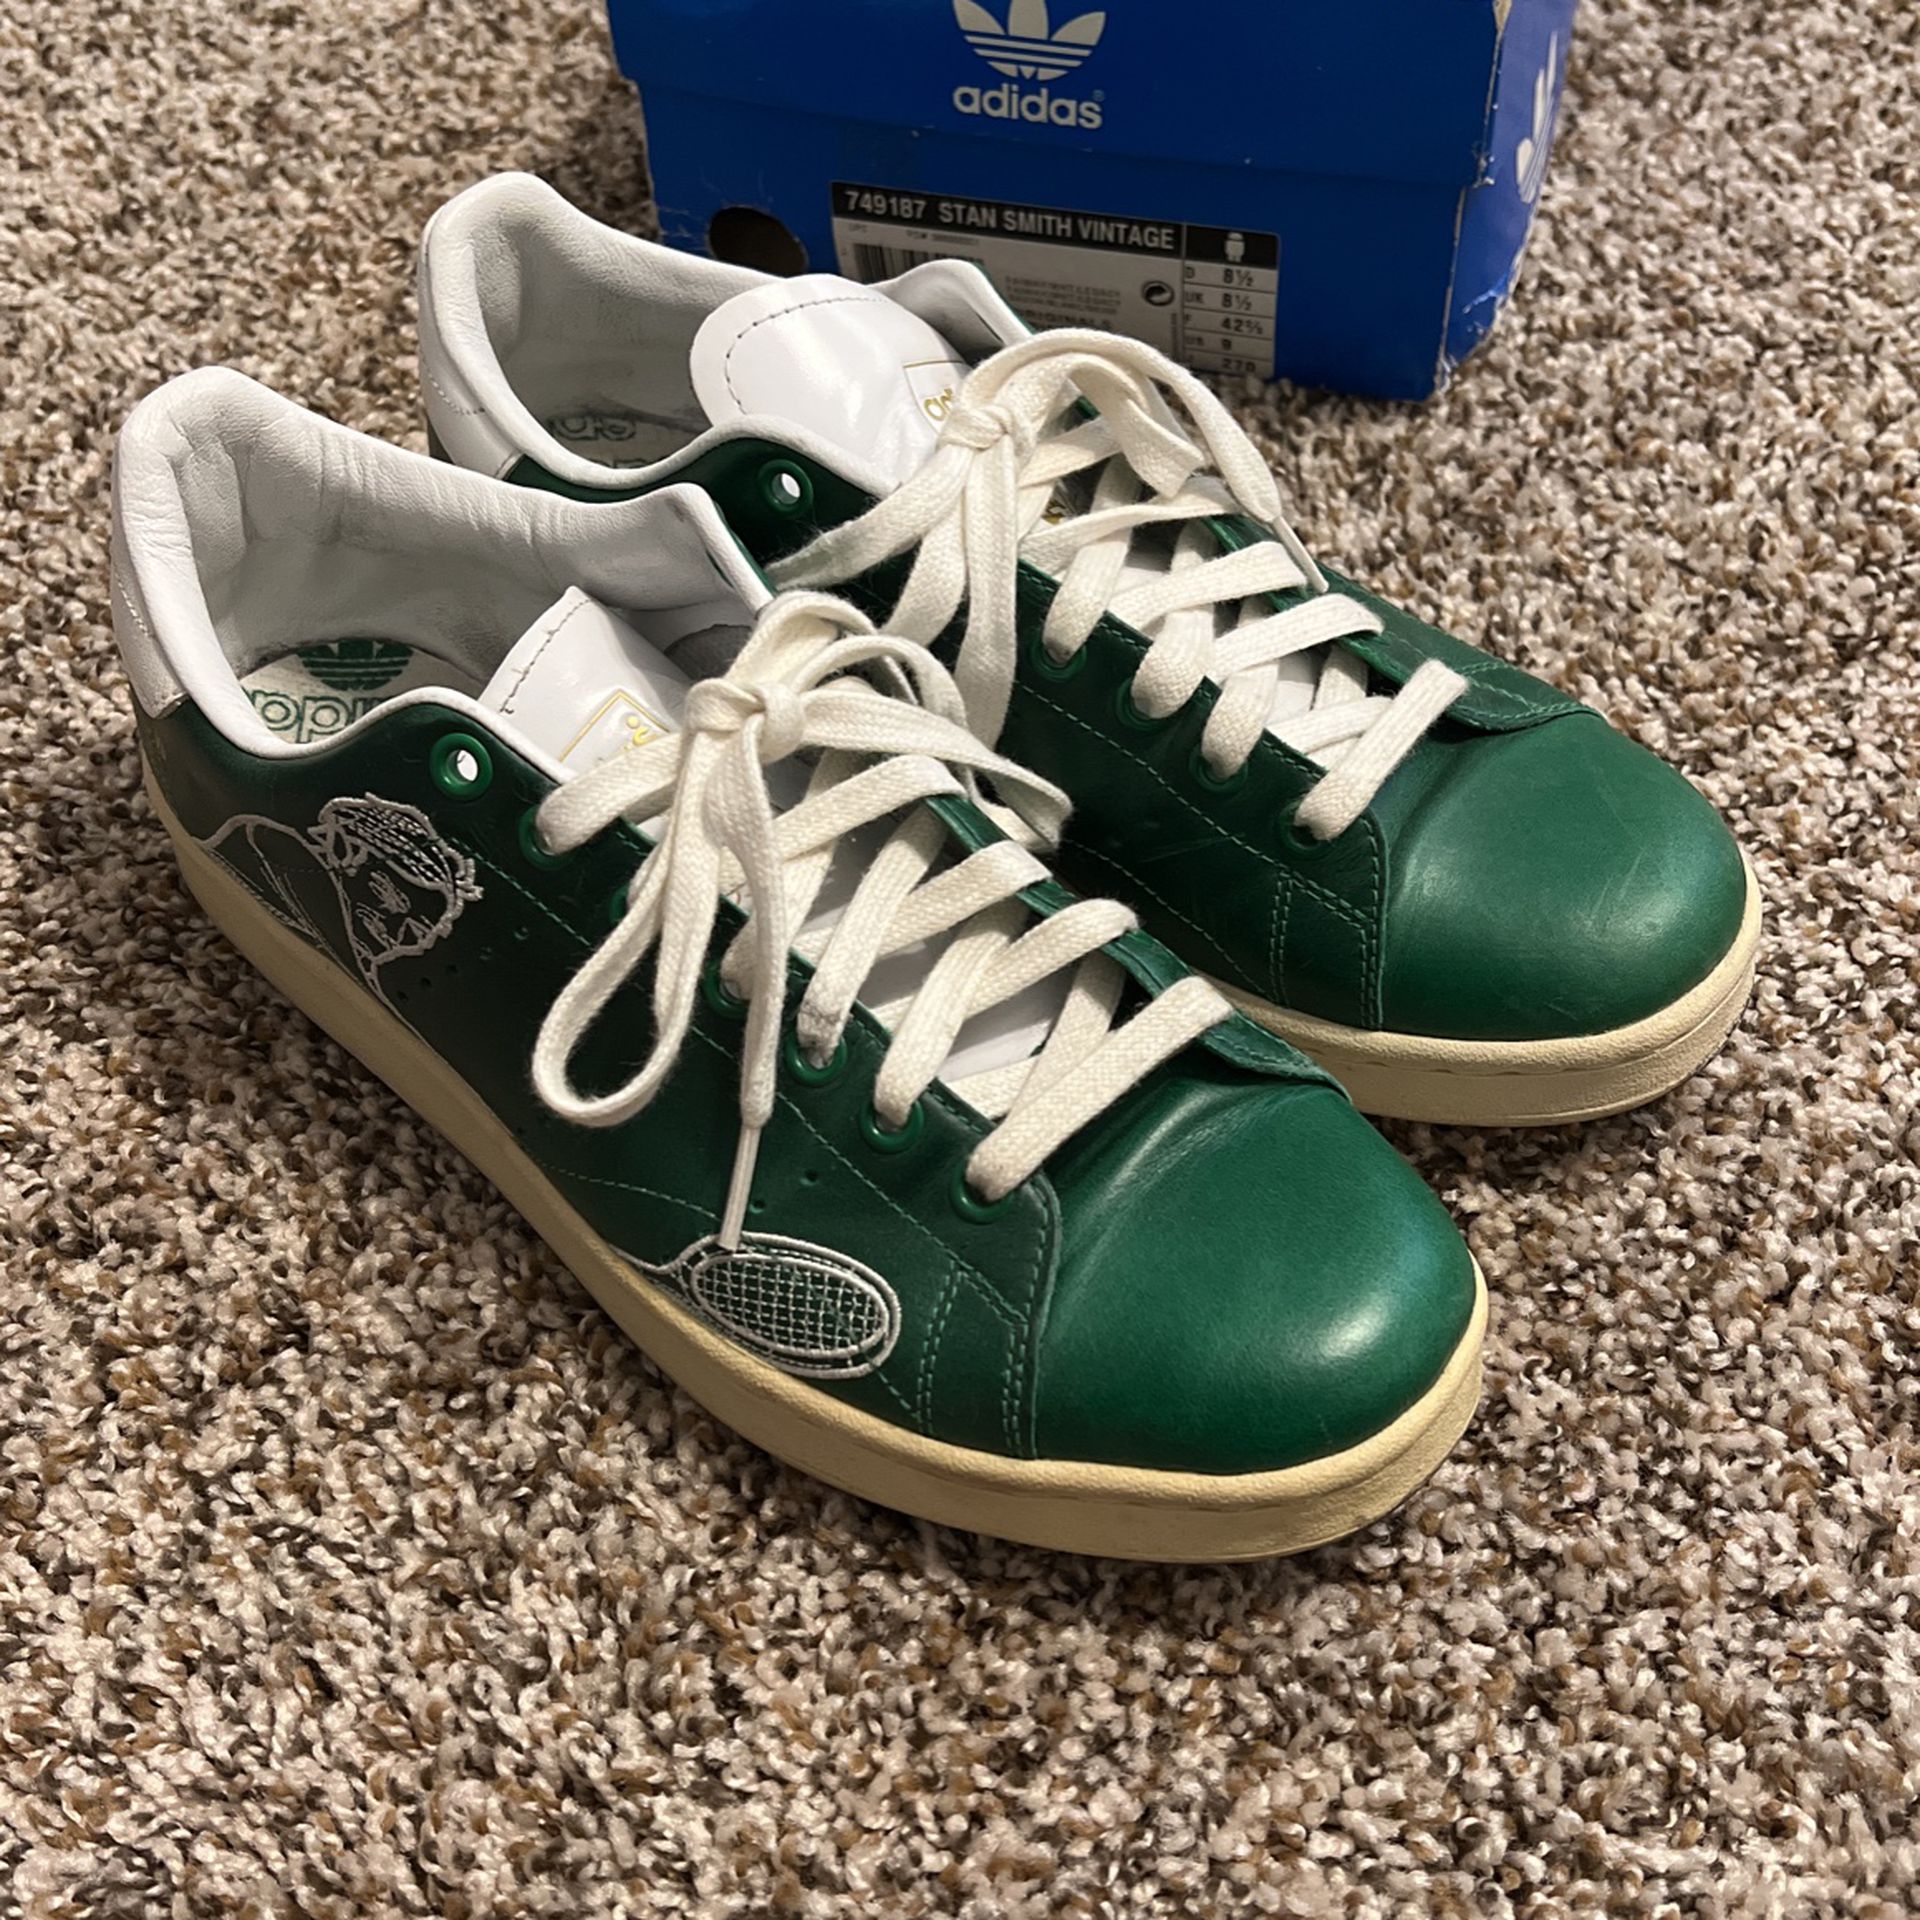 Adidas Stan Smith Size Vintage Smith Vs Nastase for Sale in Fort Myers, FL - OfferUp